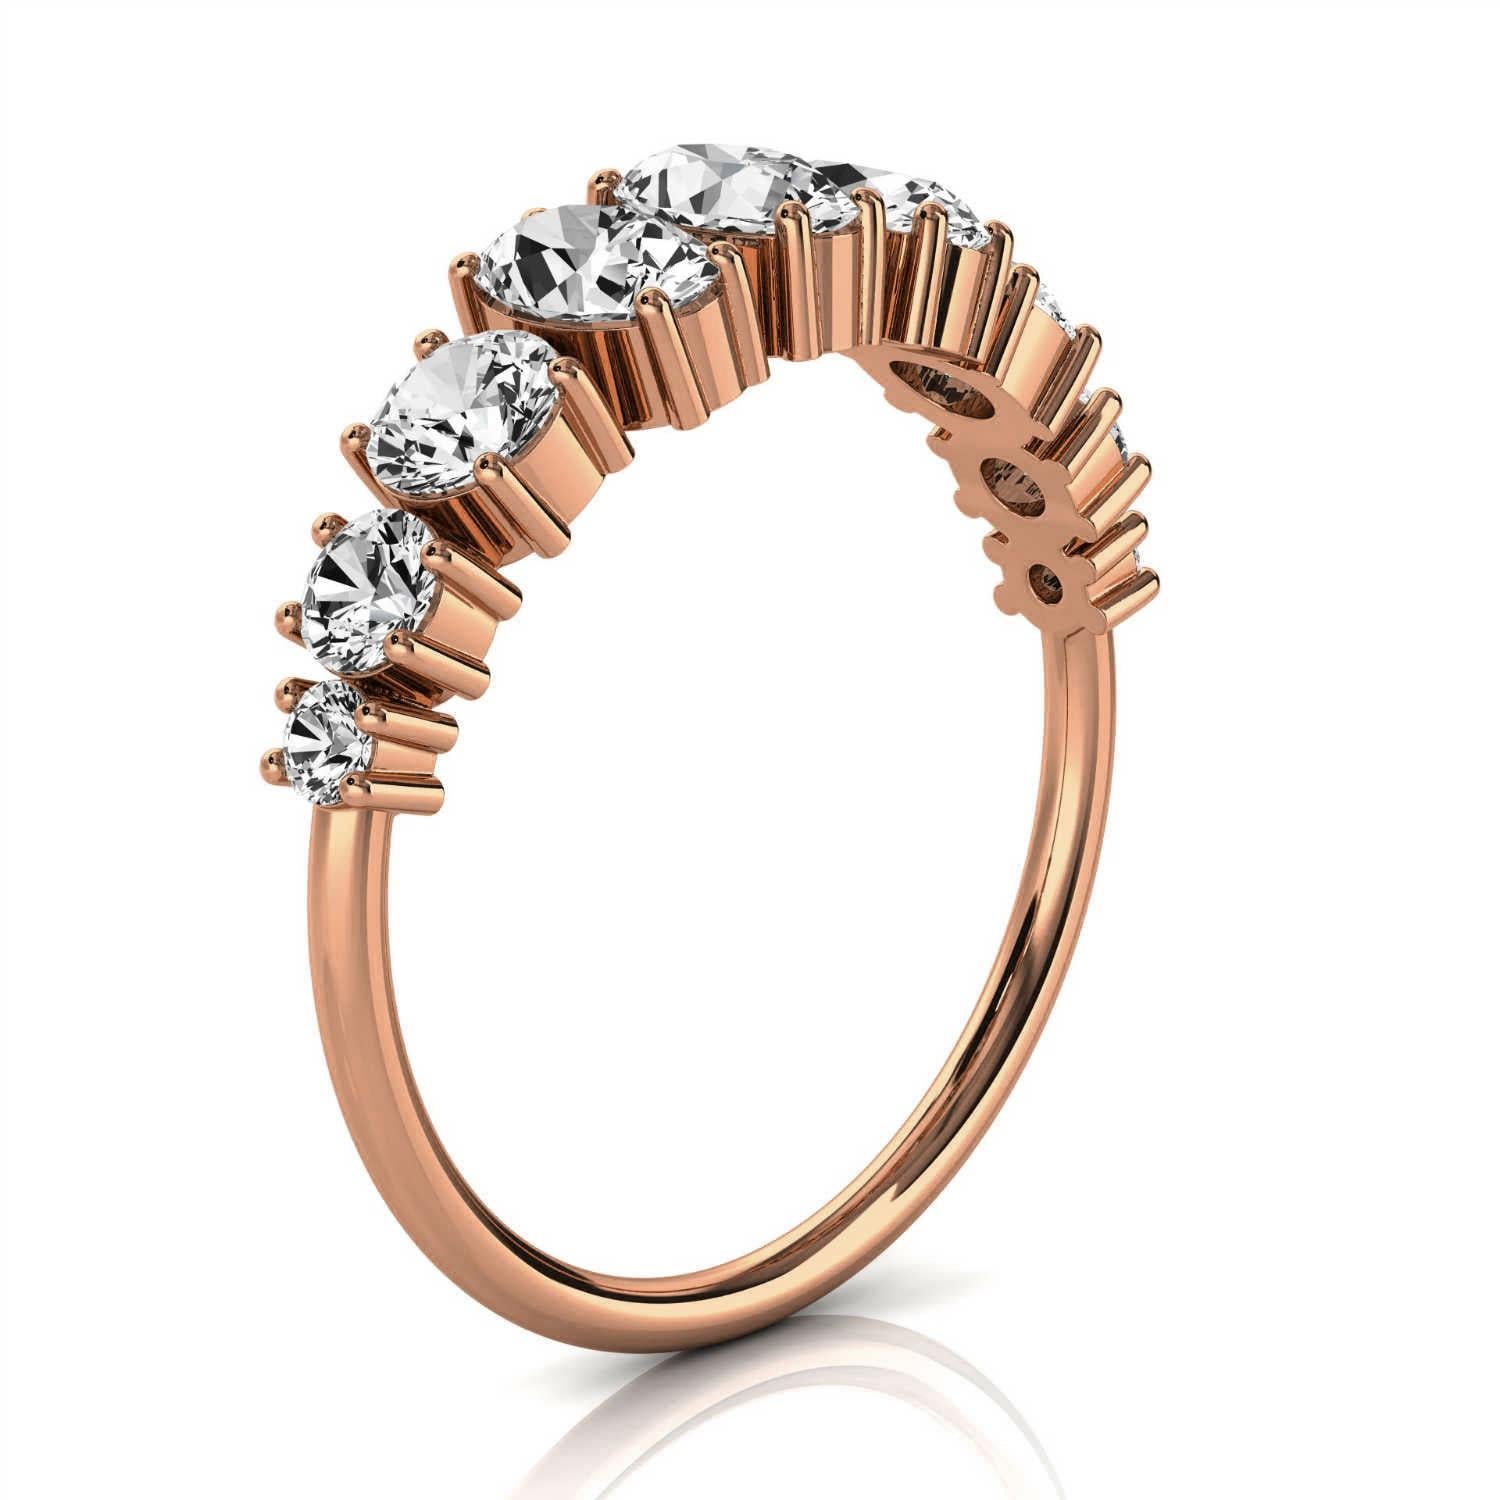 This delicate ring features three ( 3) Oval shape diamond 5x3 mm each flanked by three (3) graduated round brilliant diamonds on each side. The tiny prongs enhance its organic design. It's a conversation piece, no doubt about it. Experience the